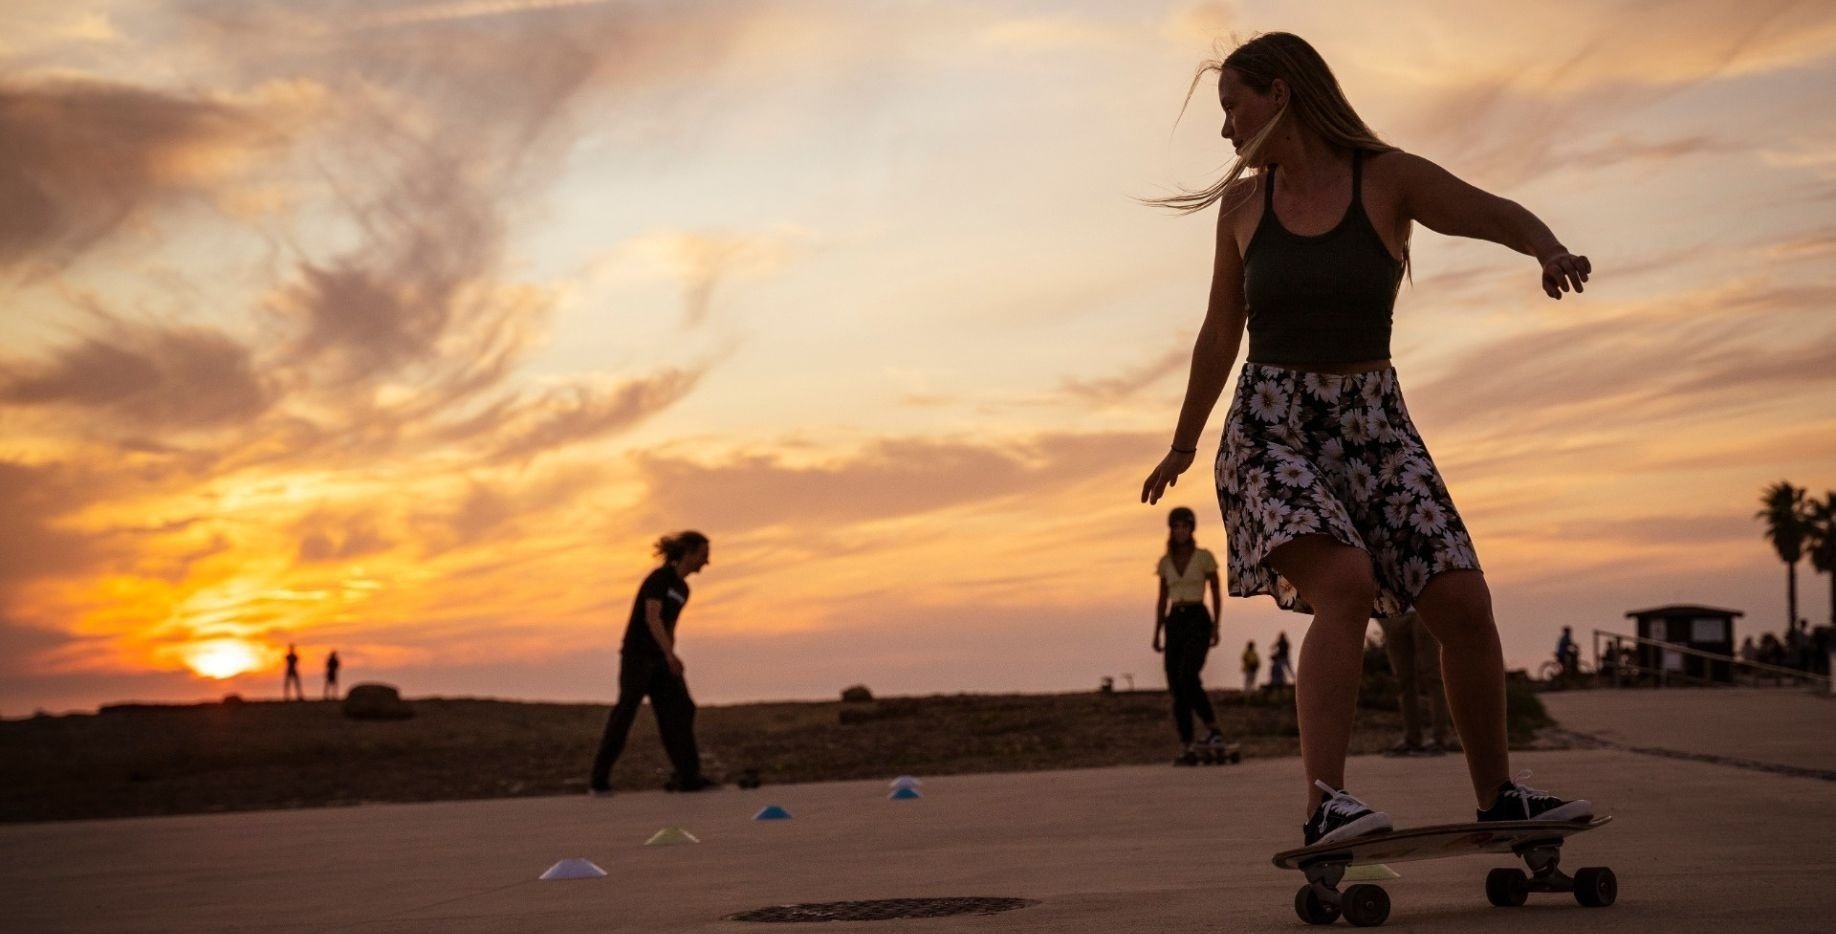 a woman in a floral skirt is riding a skateboard at sunset